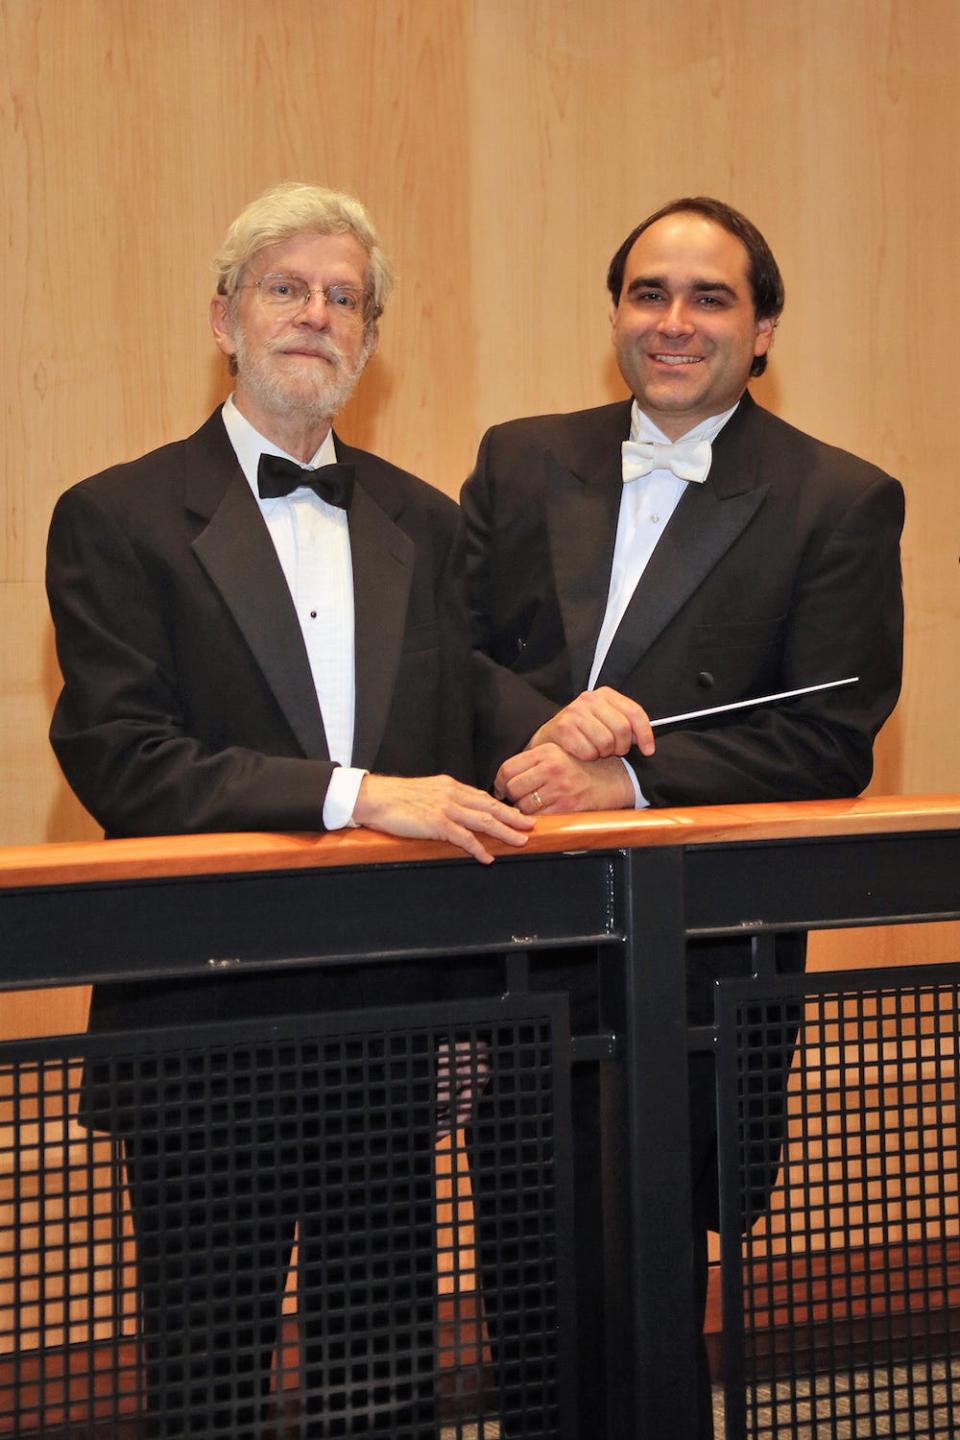 Accompanist Donald Enos, left, and music director Joseph Marchio will lead the Chatham Chorale this weekend in its celebration of American music.